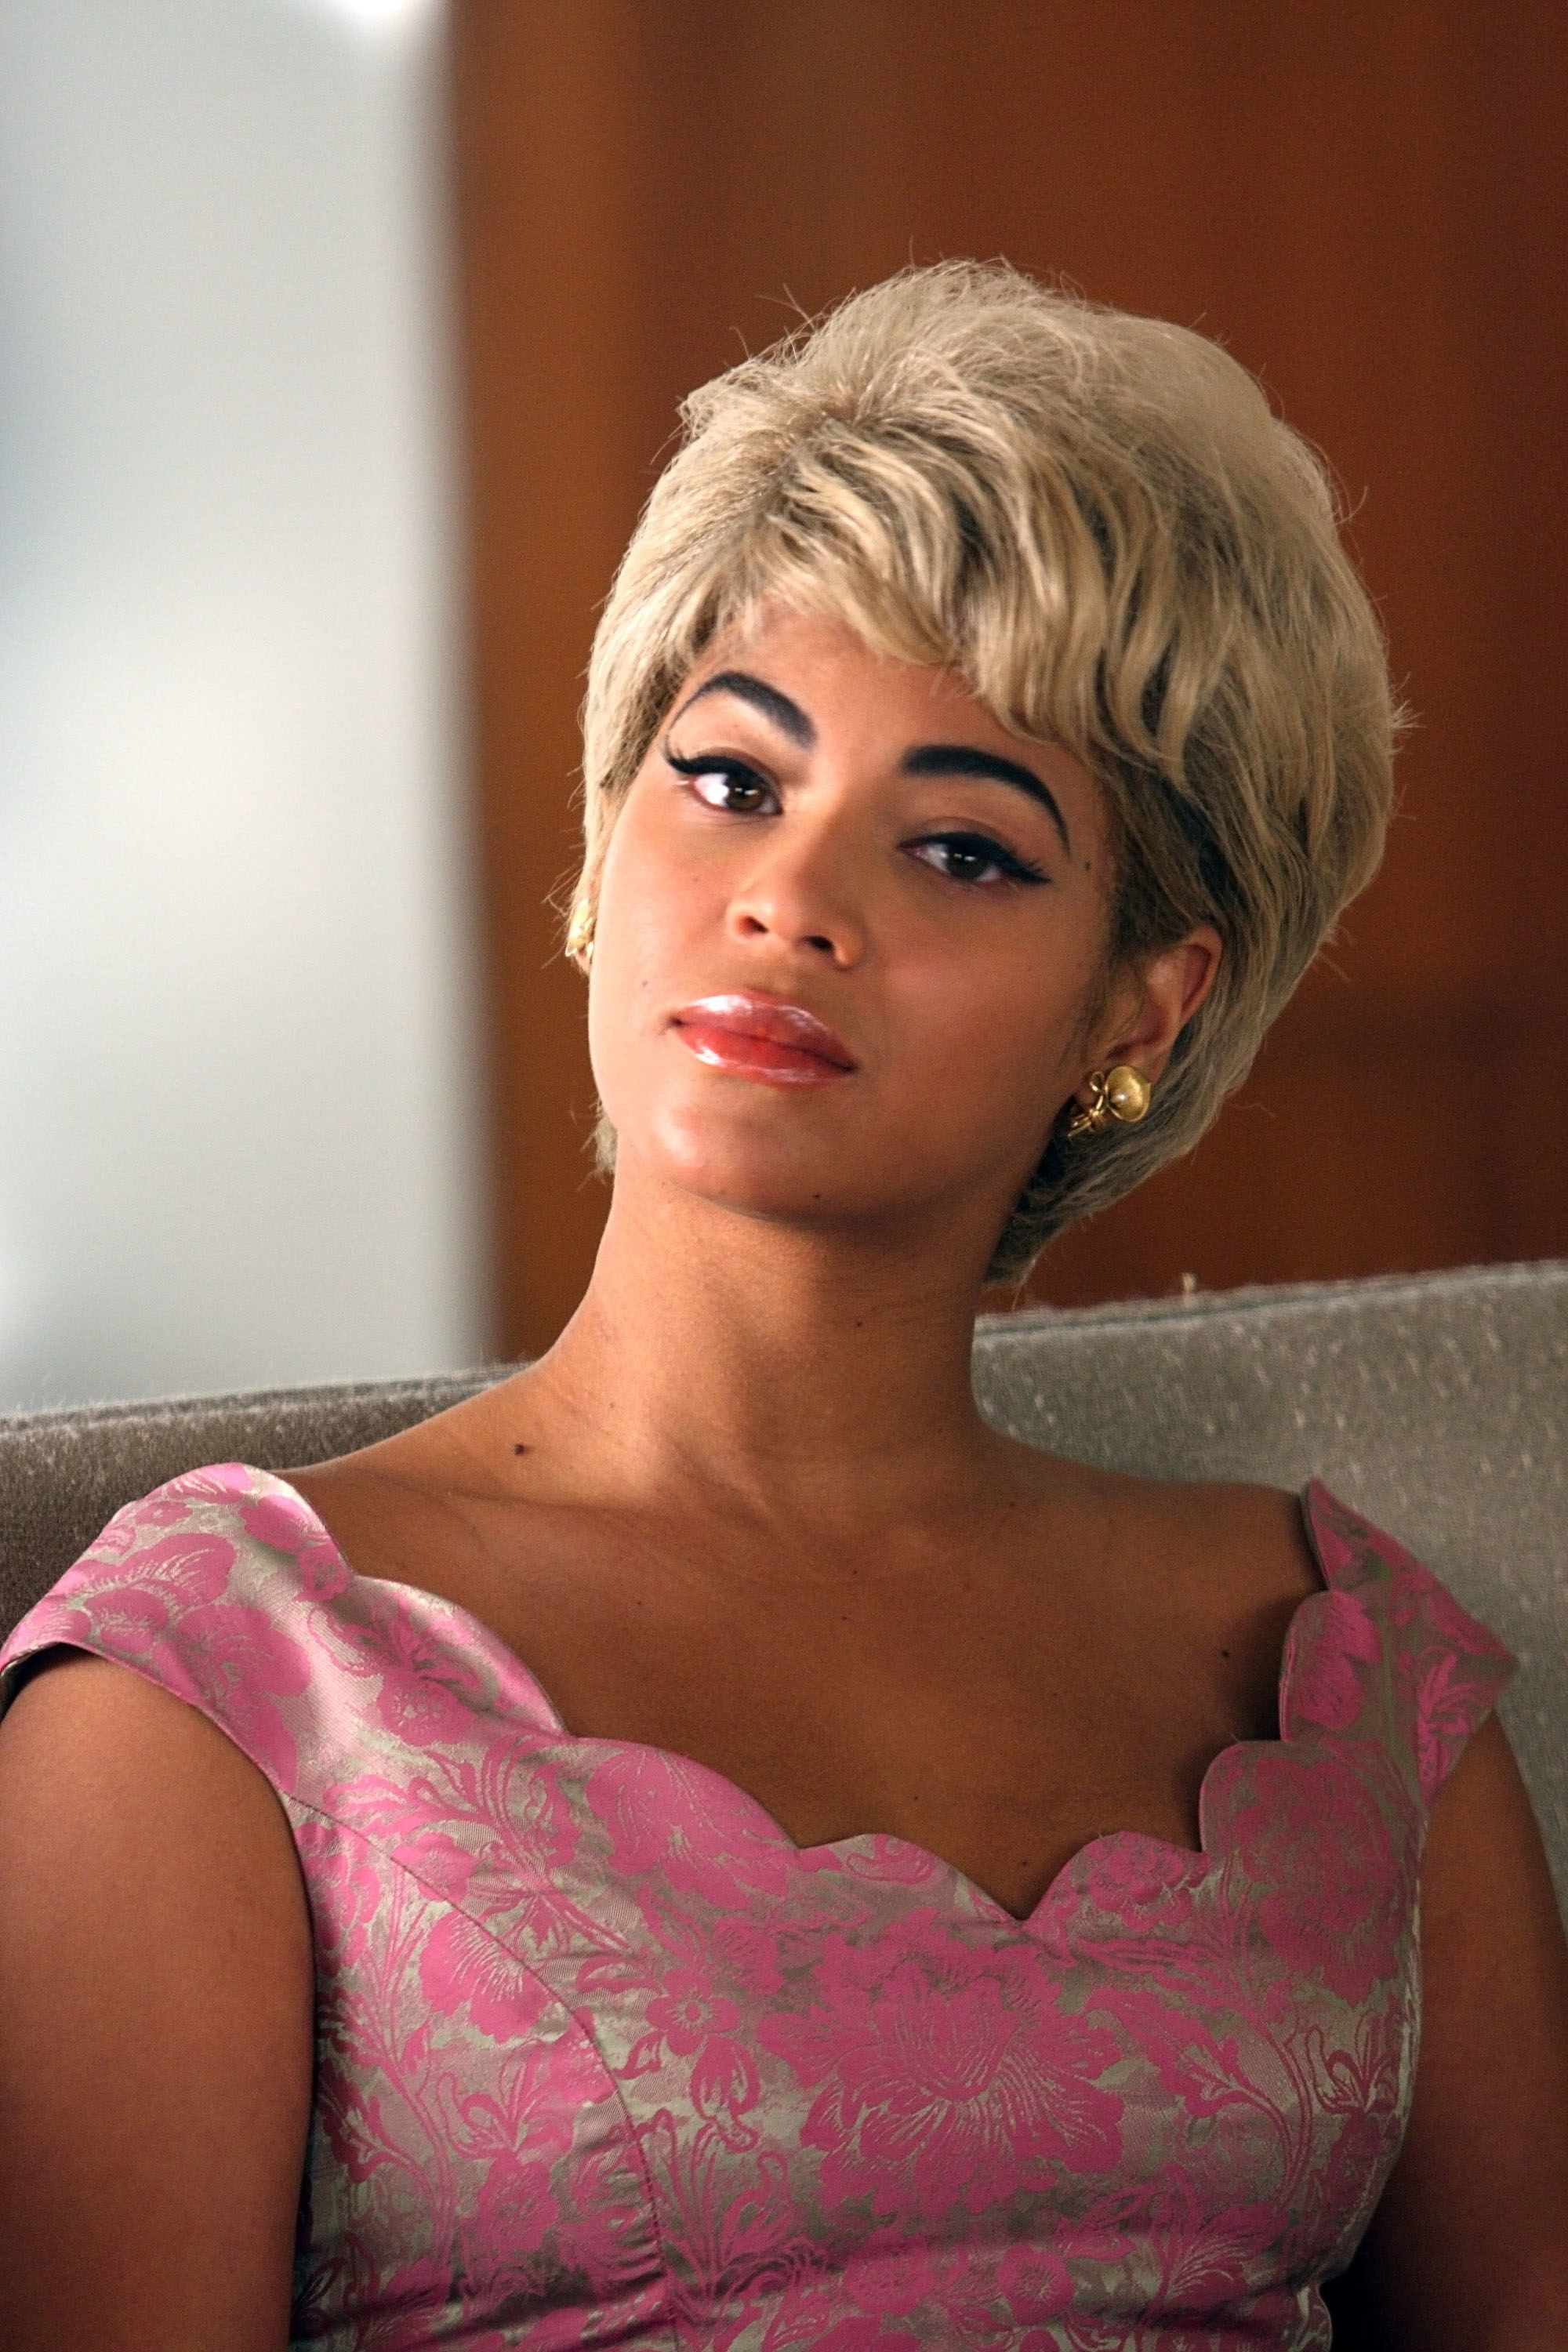 Beyoncé sitting in a chair with short, blonde hair